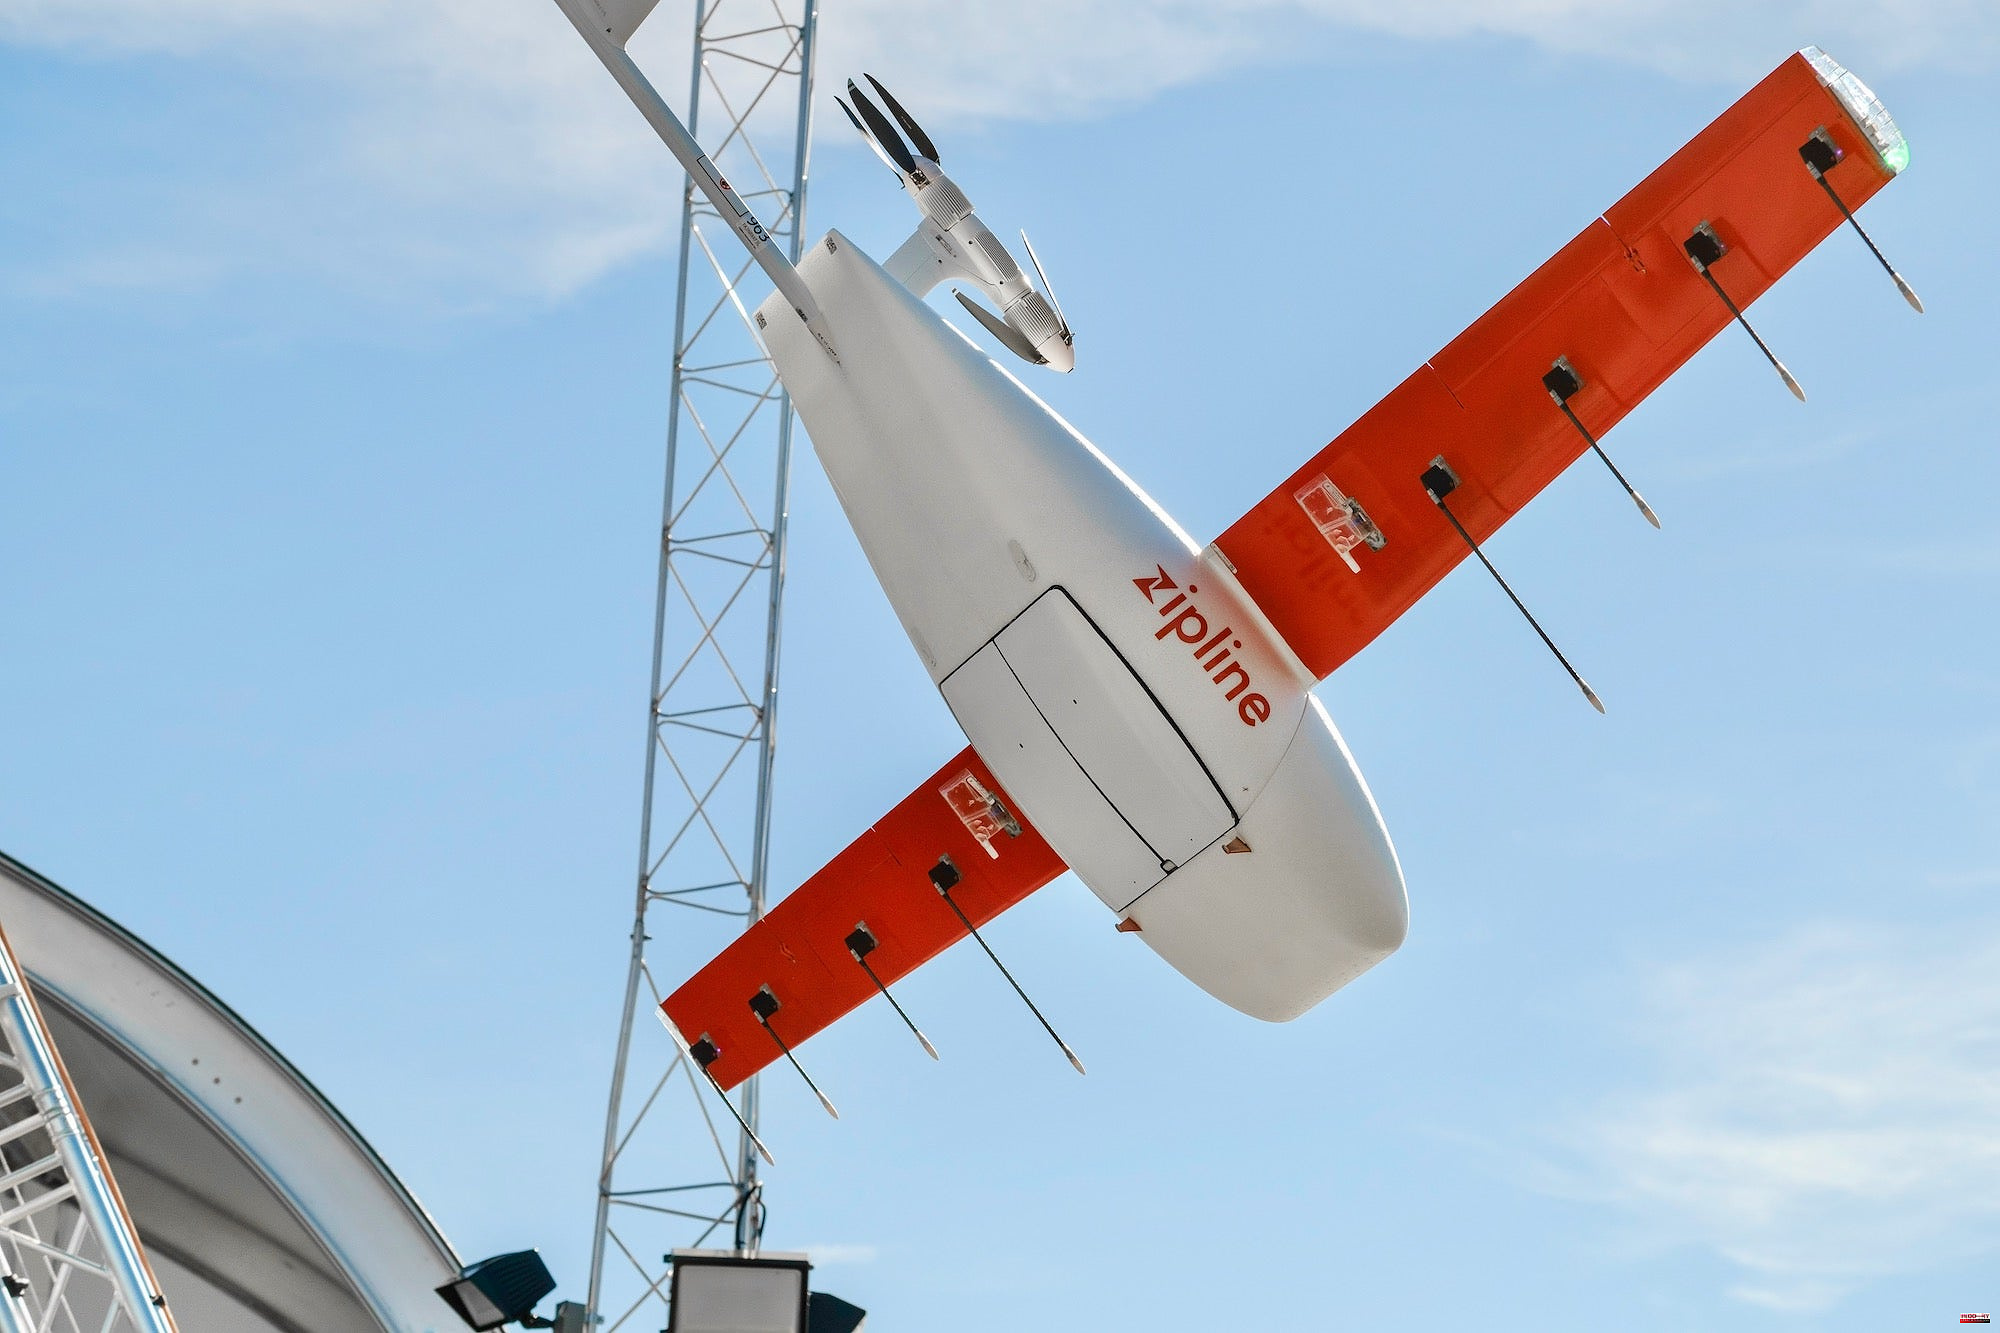 These drones can listen for other aircraft and avoid collisions in midair.
